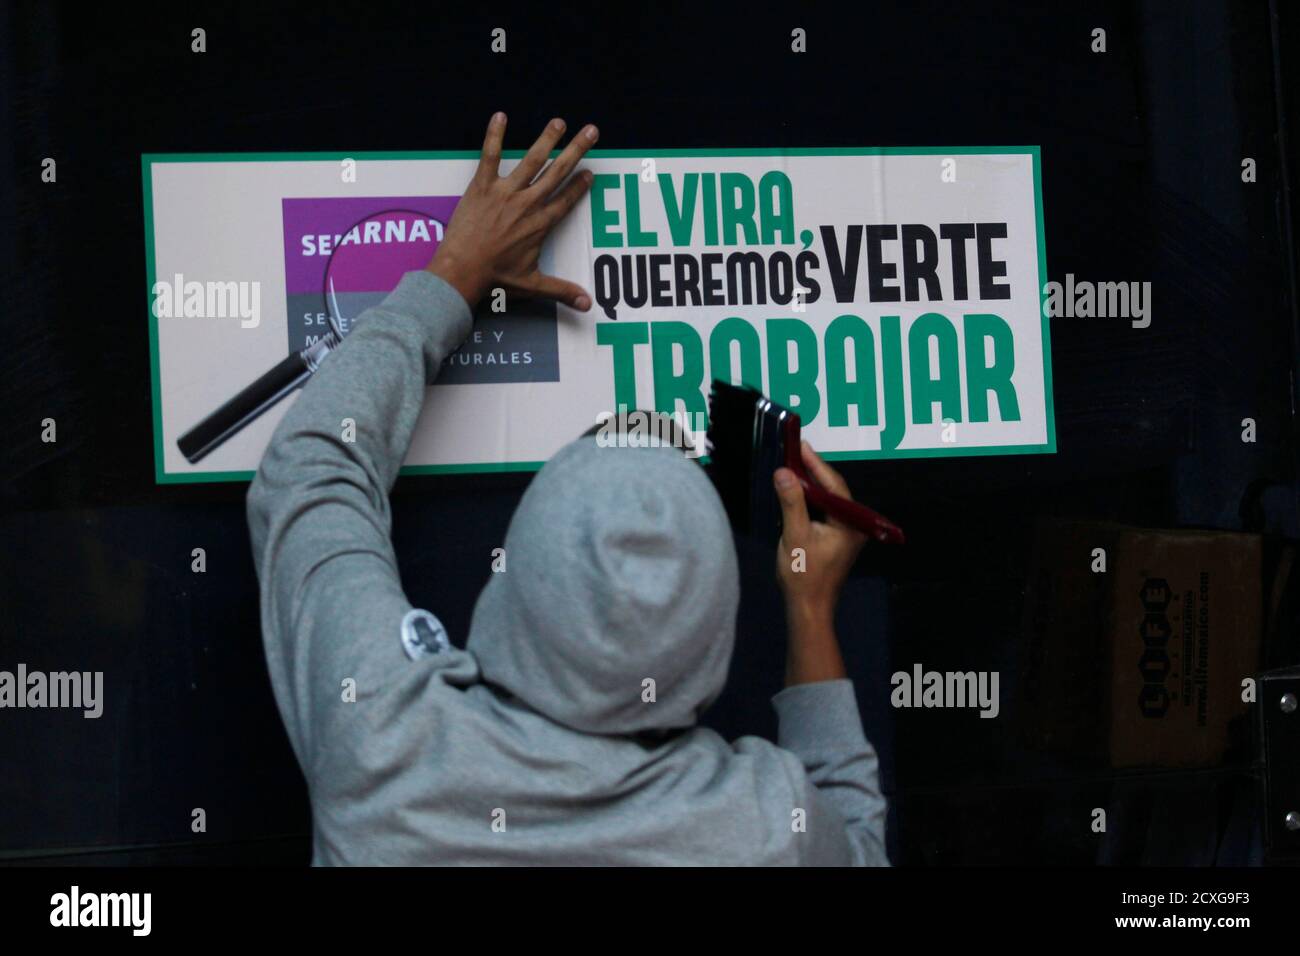 A Greenpeace activist pastes a poster in protest against the cultivation of transgenic maize outside the SEMARNAT (Secretary of Environment and Natural Resources) building in Mexico City June 5, 2012. The posters read, 'Elvira we want to see you work.' REUTERS/Edgard Garrido (MEXICO - Tags: ENVIRONMENT CIVIL UNREST AGRICULTURE) Stock Photo